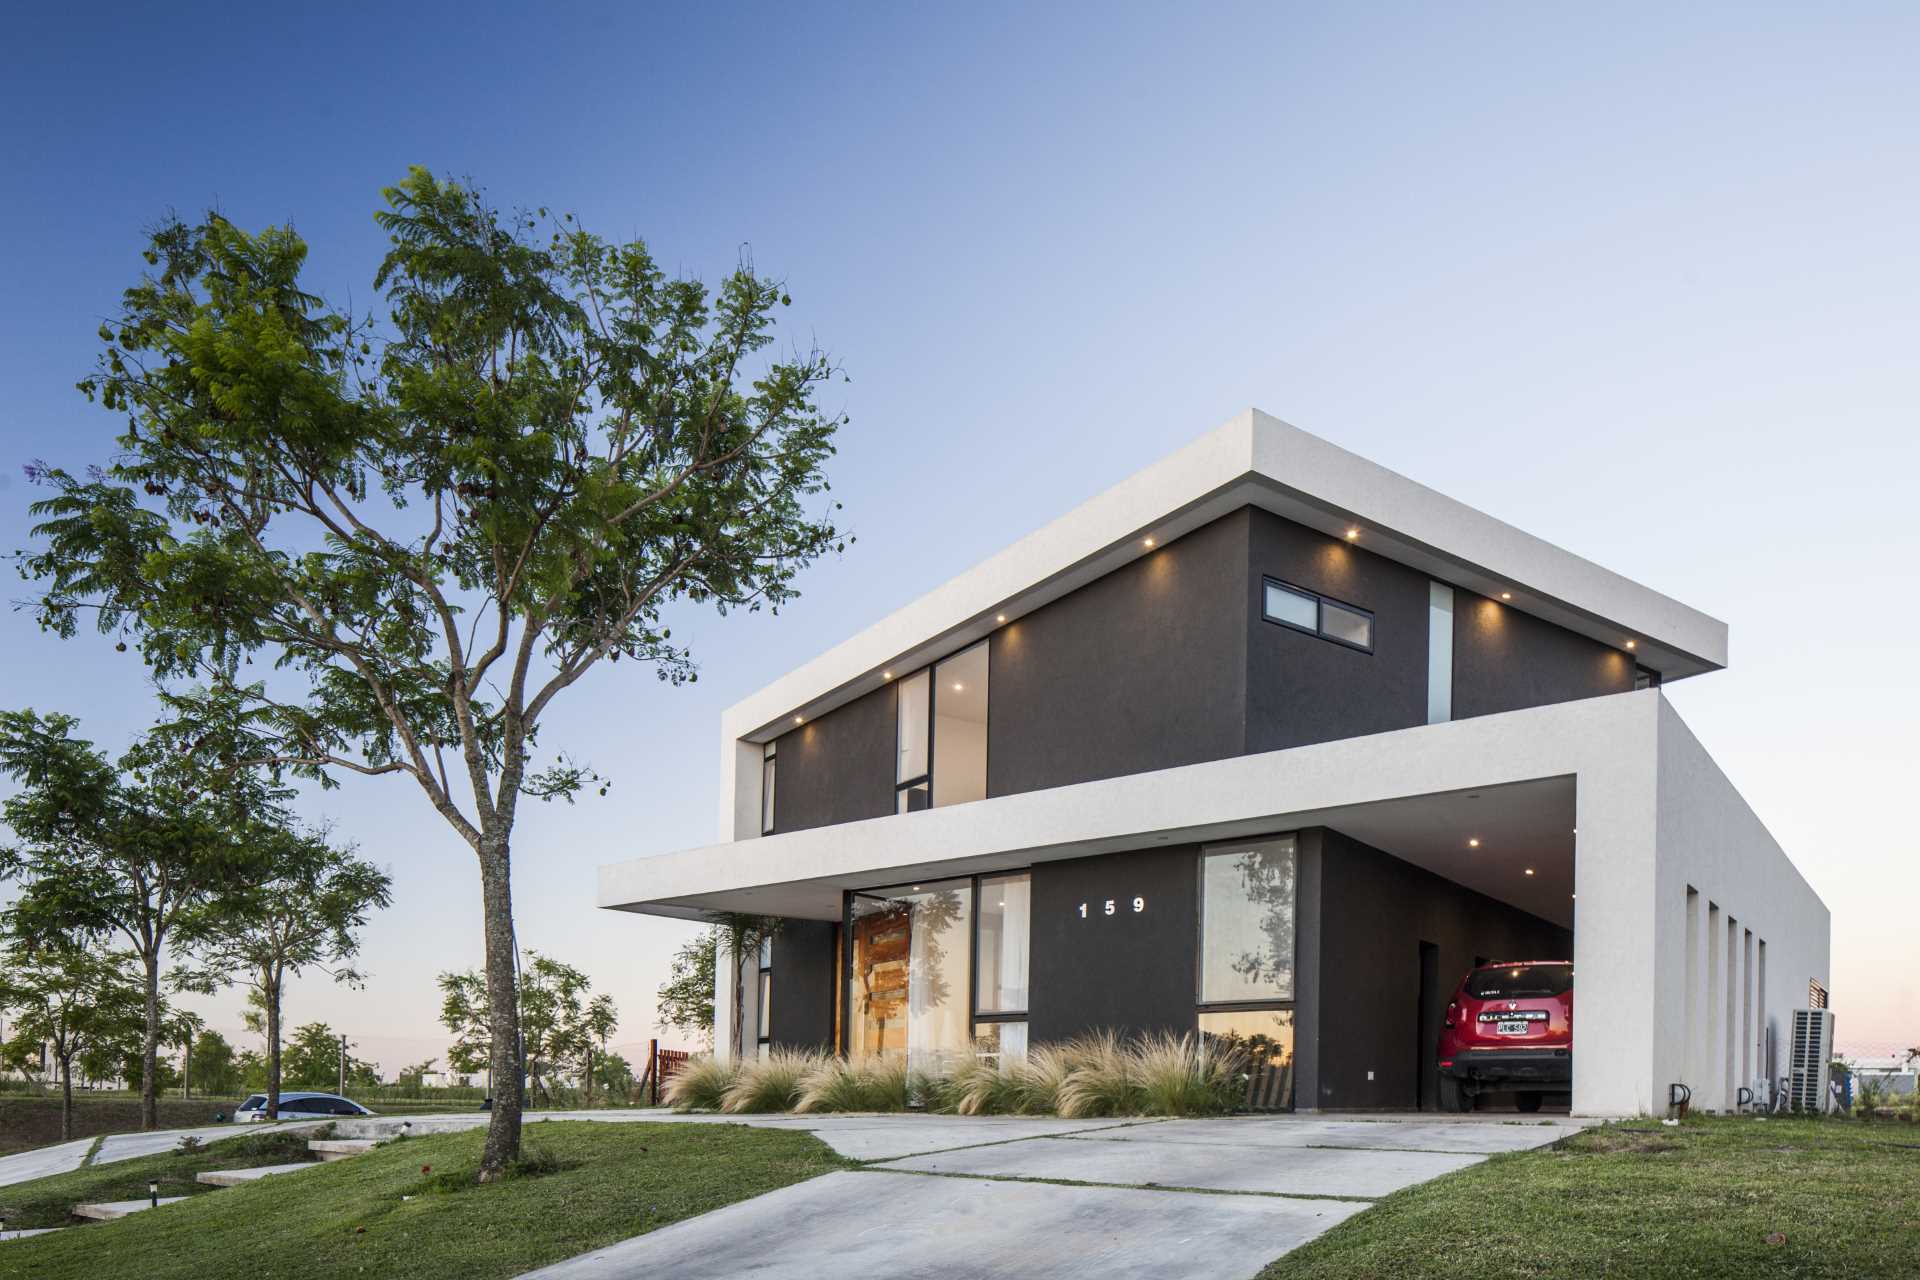 A modern home whose shape is based on the idea of turning boxes.